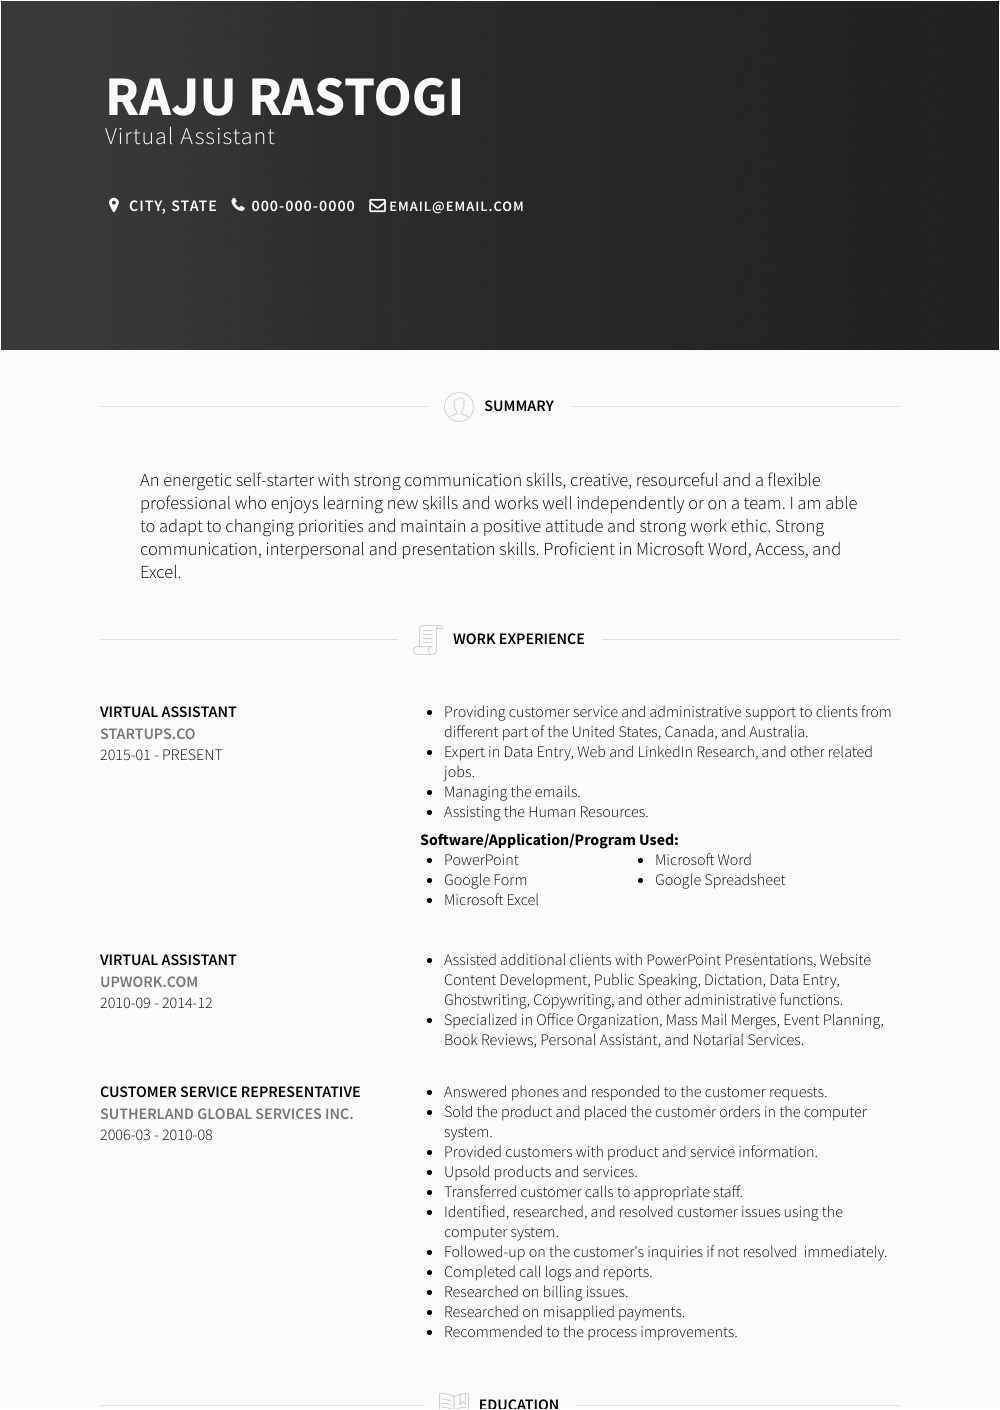 Sample Resume format for Virtual assistant Virtual assistant Resume Samples and Templates